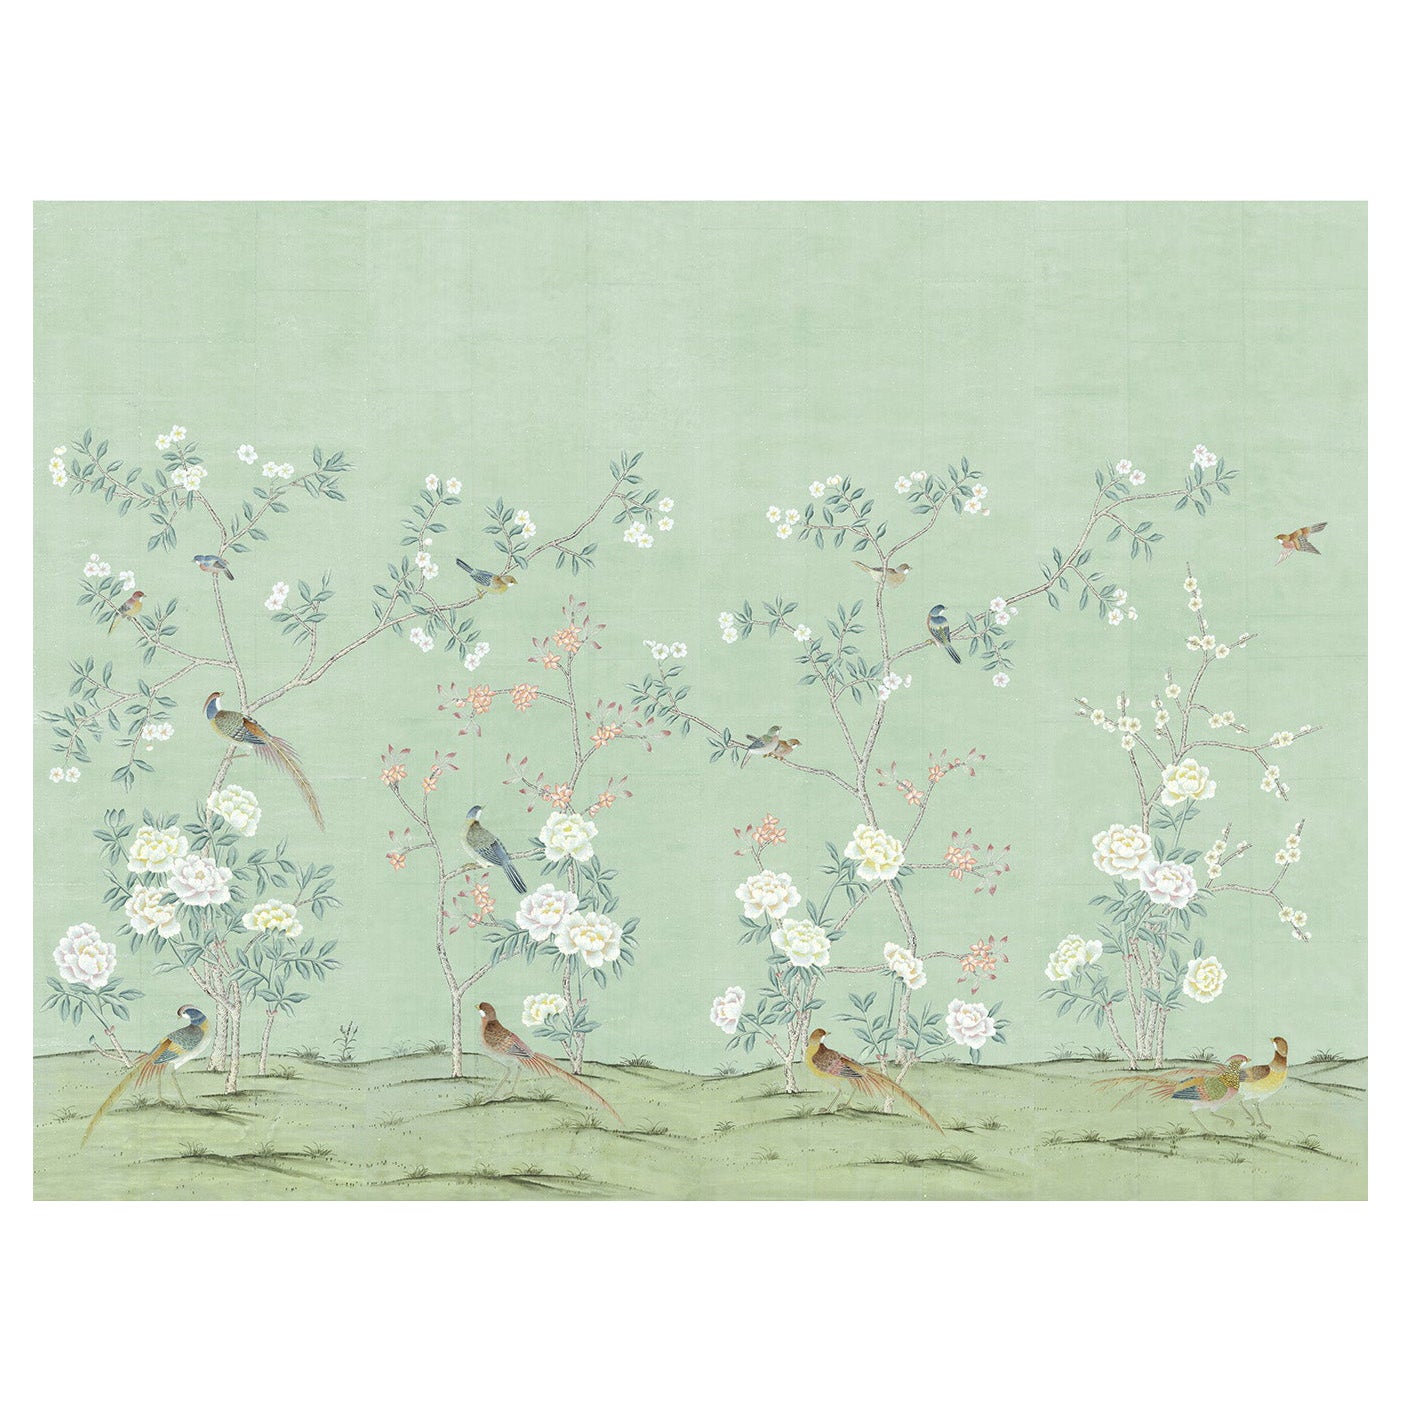 Maysong Sea Mist Chinoiserie Mural Wallpaper